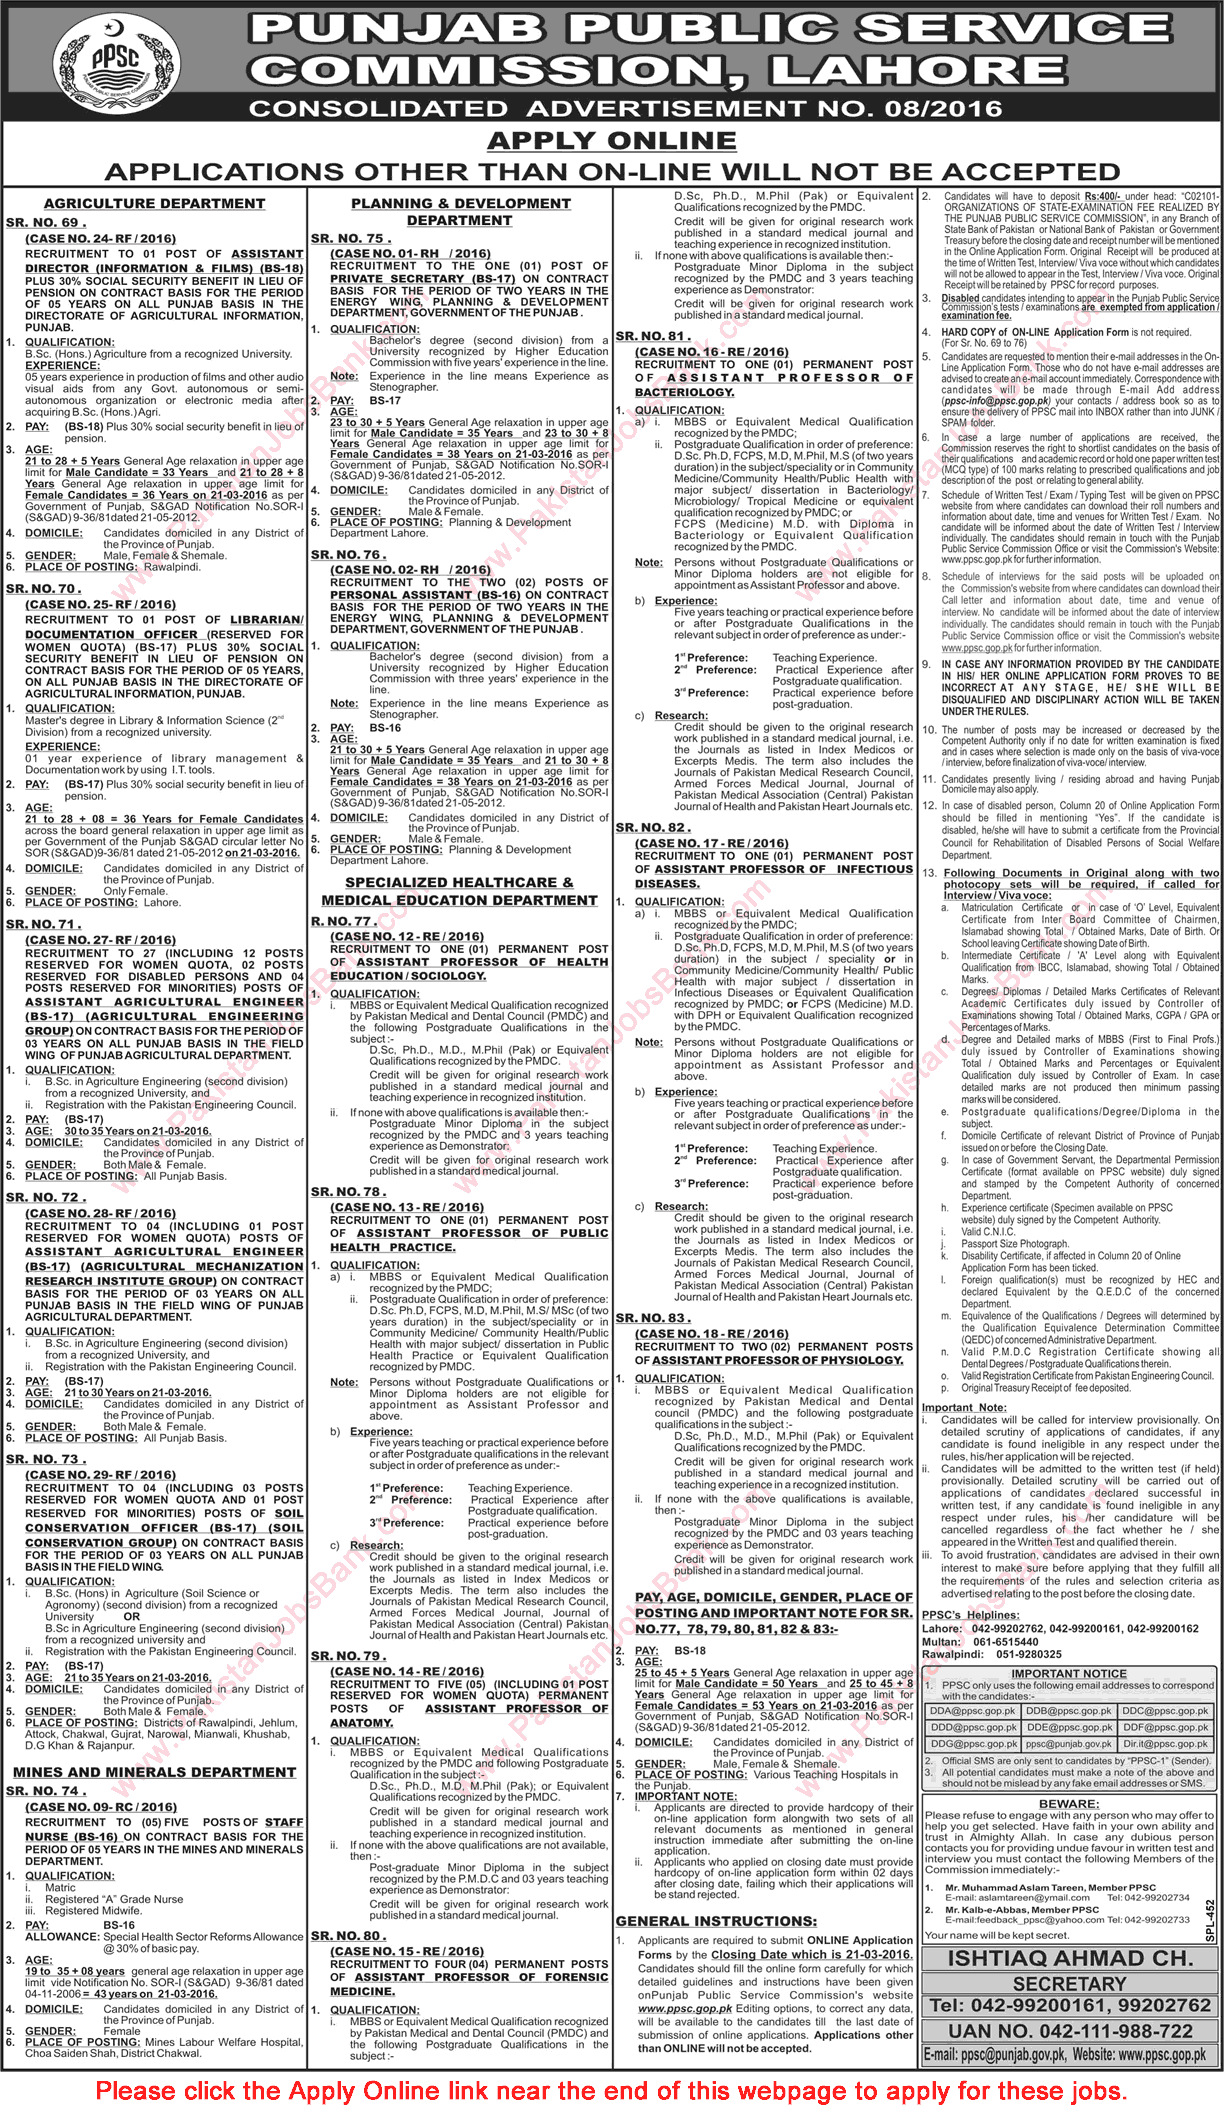 PPSC Jobs March 2016 Consolidated Advertisement No 08/2016 8/2016 Apply Online Latest